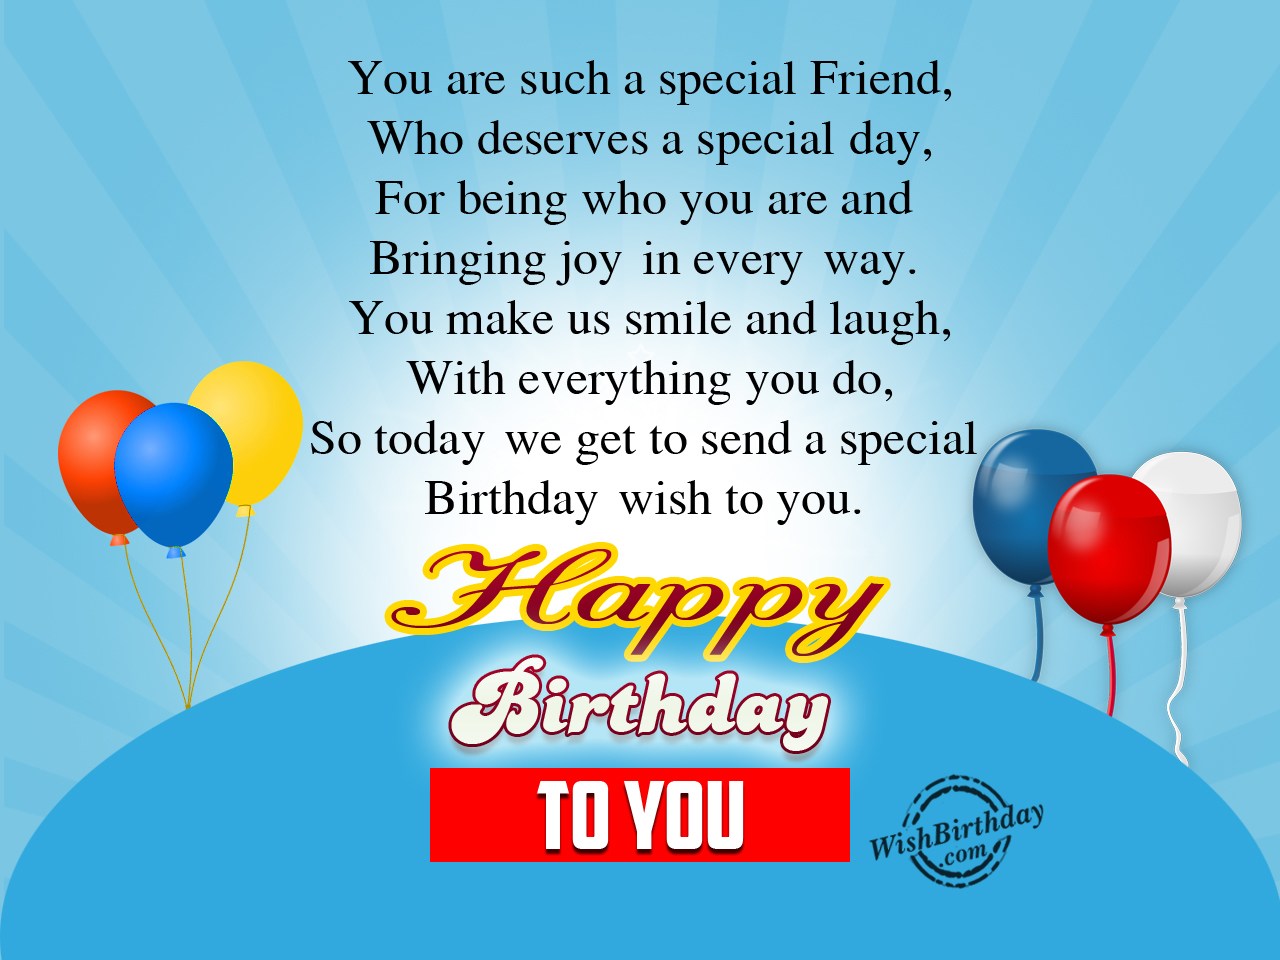 Sending Special wishes To My Dear Friend - Birthday Wishes, Happy ...